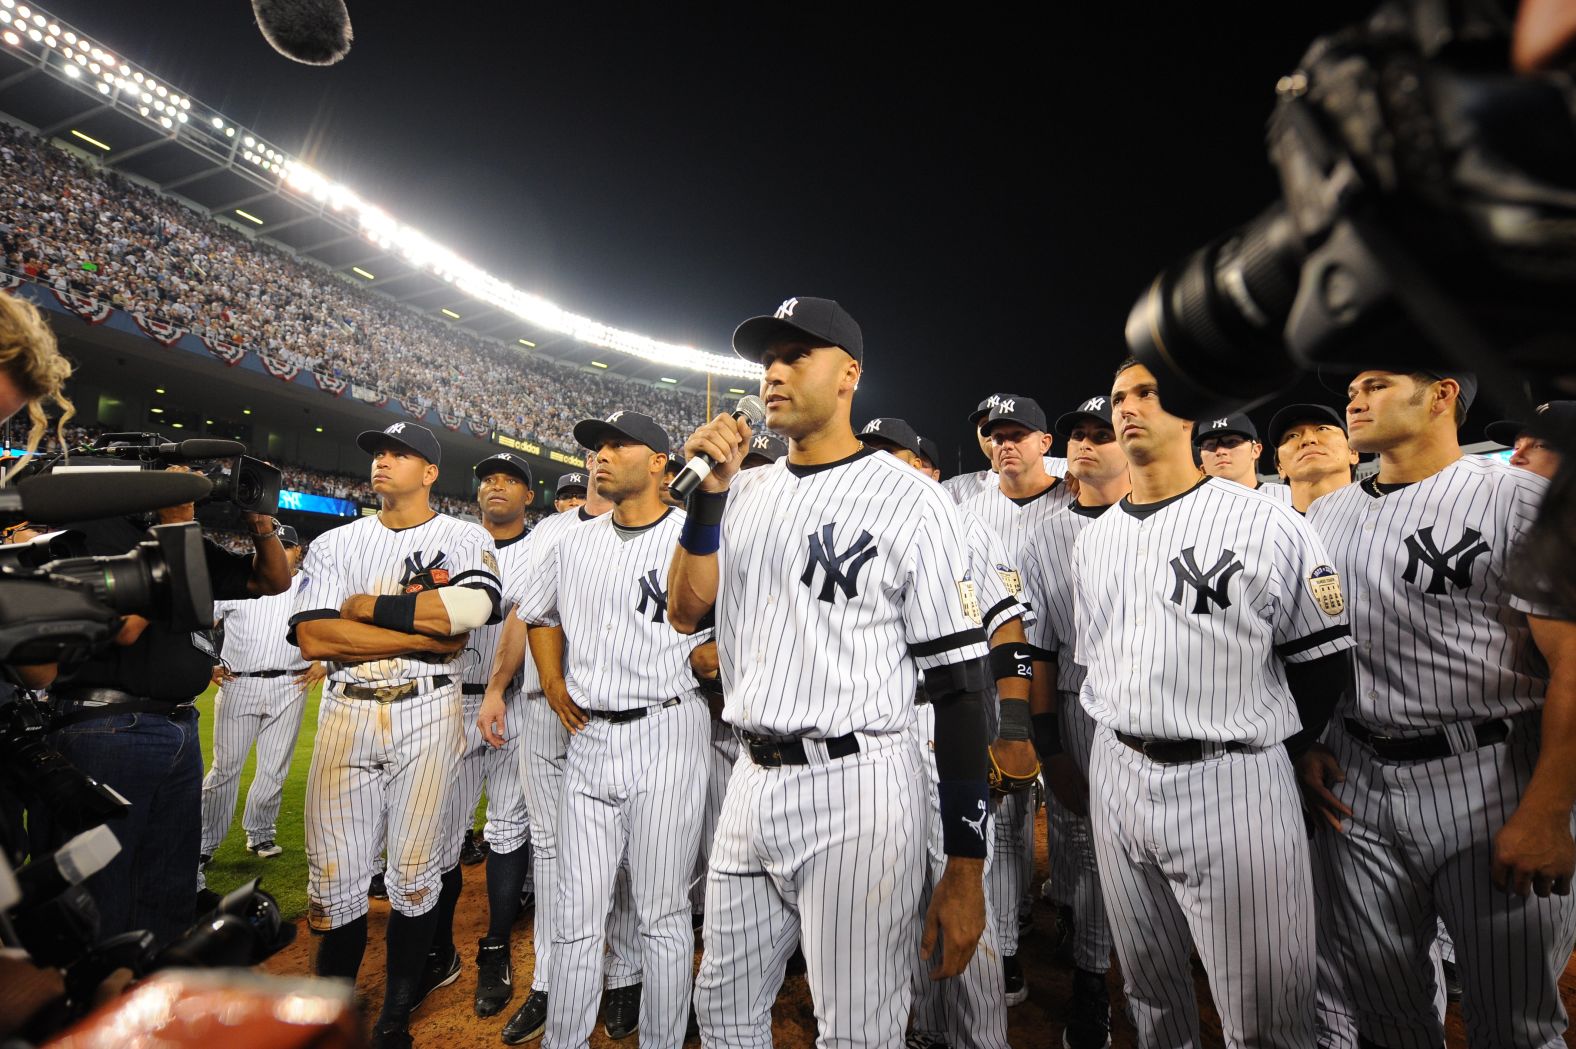 Jeter addresses the crowd after the Yankees played their final game at the old Yankee Stadium in September 2008.